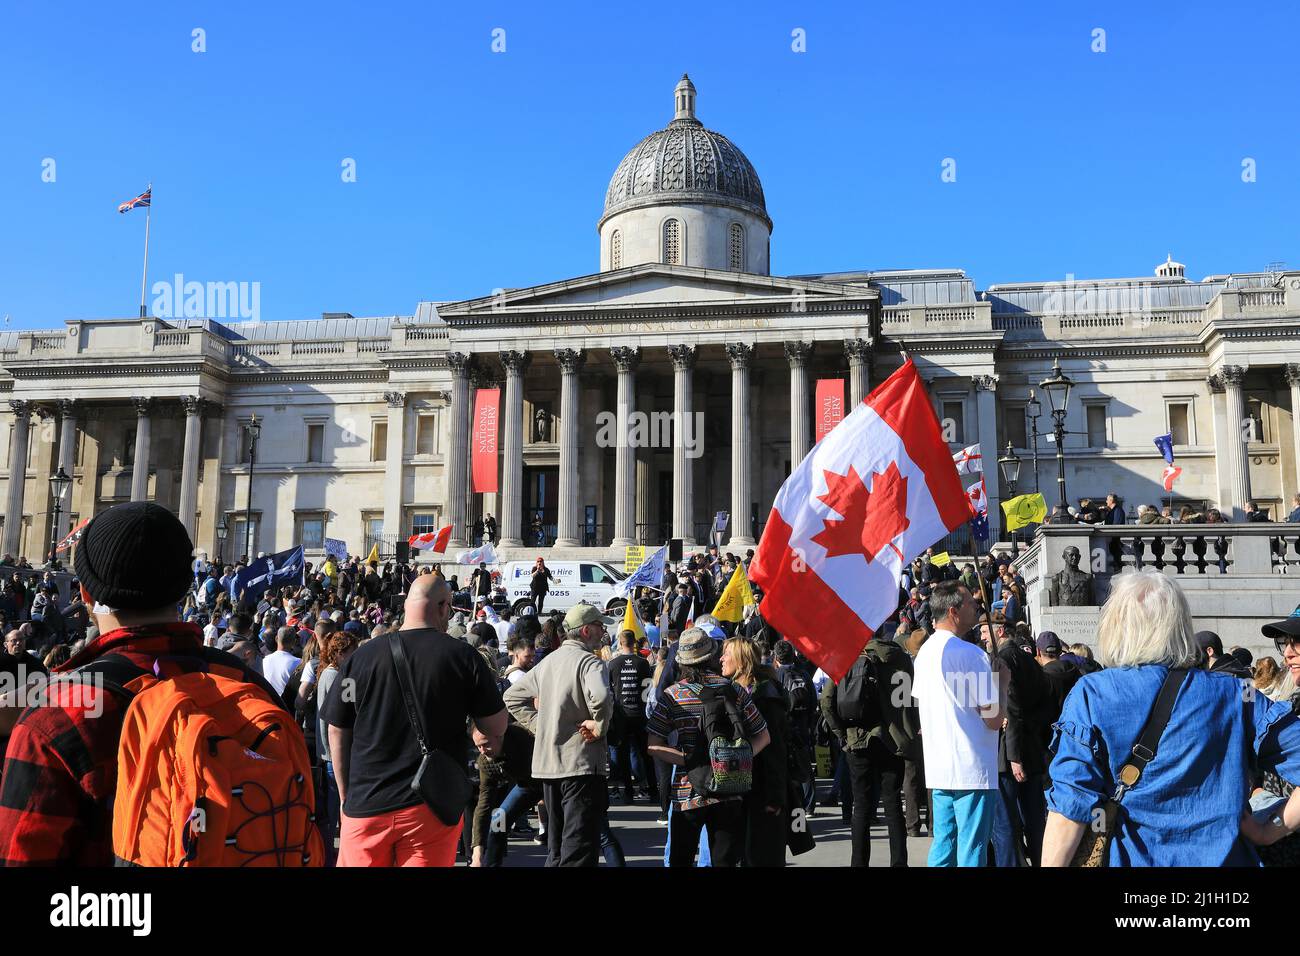 Freedom rally protesting against various right wing issues such as anti Covid vaccines and mandates, inspired by the Canadian truckers protest, UK Stock Photo